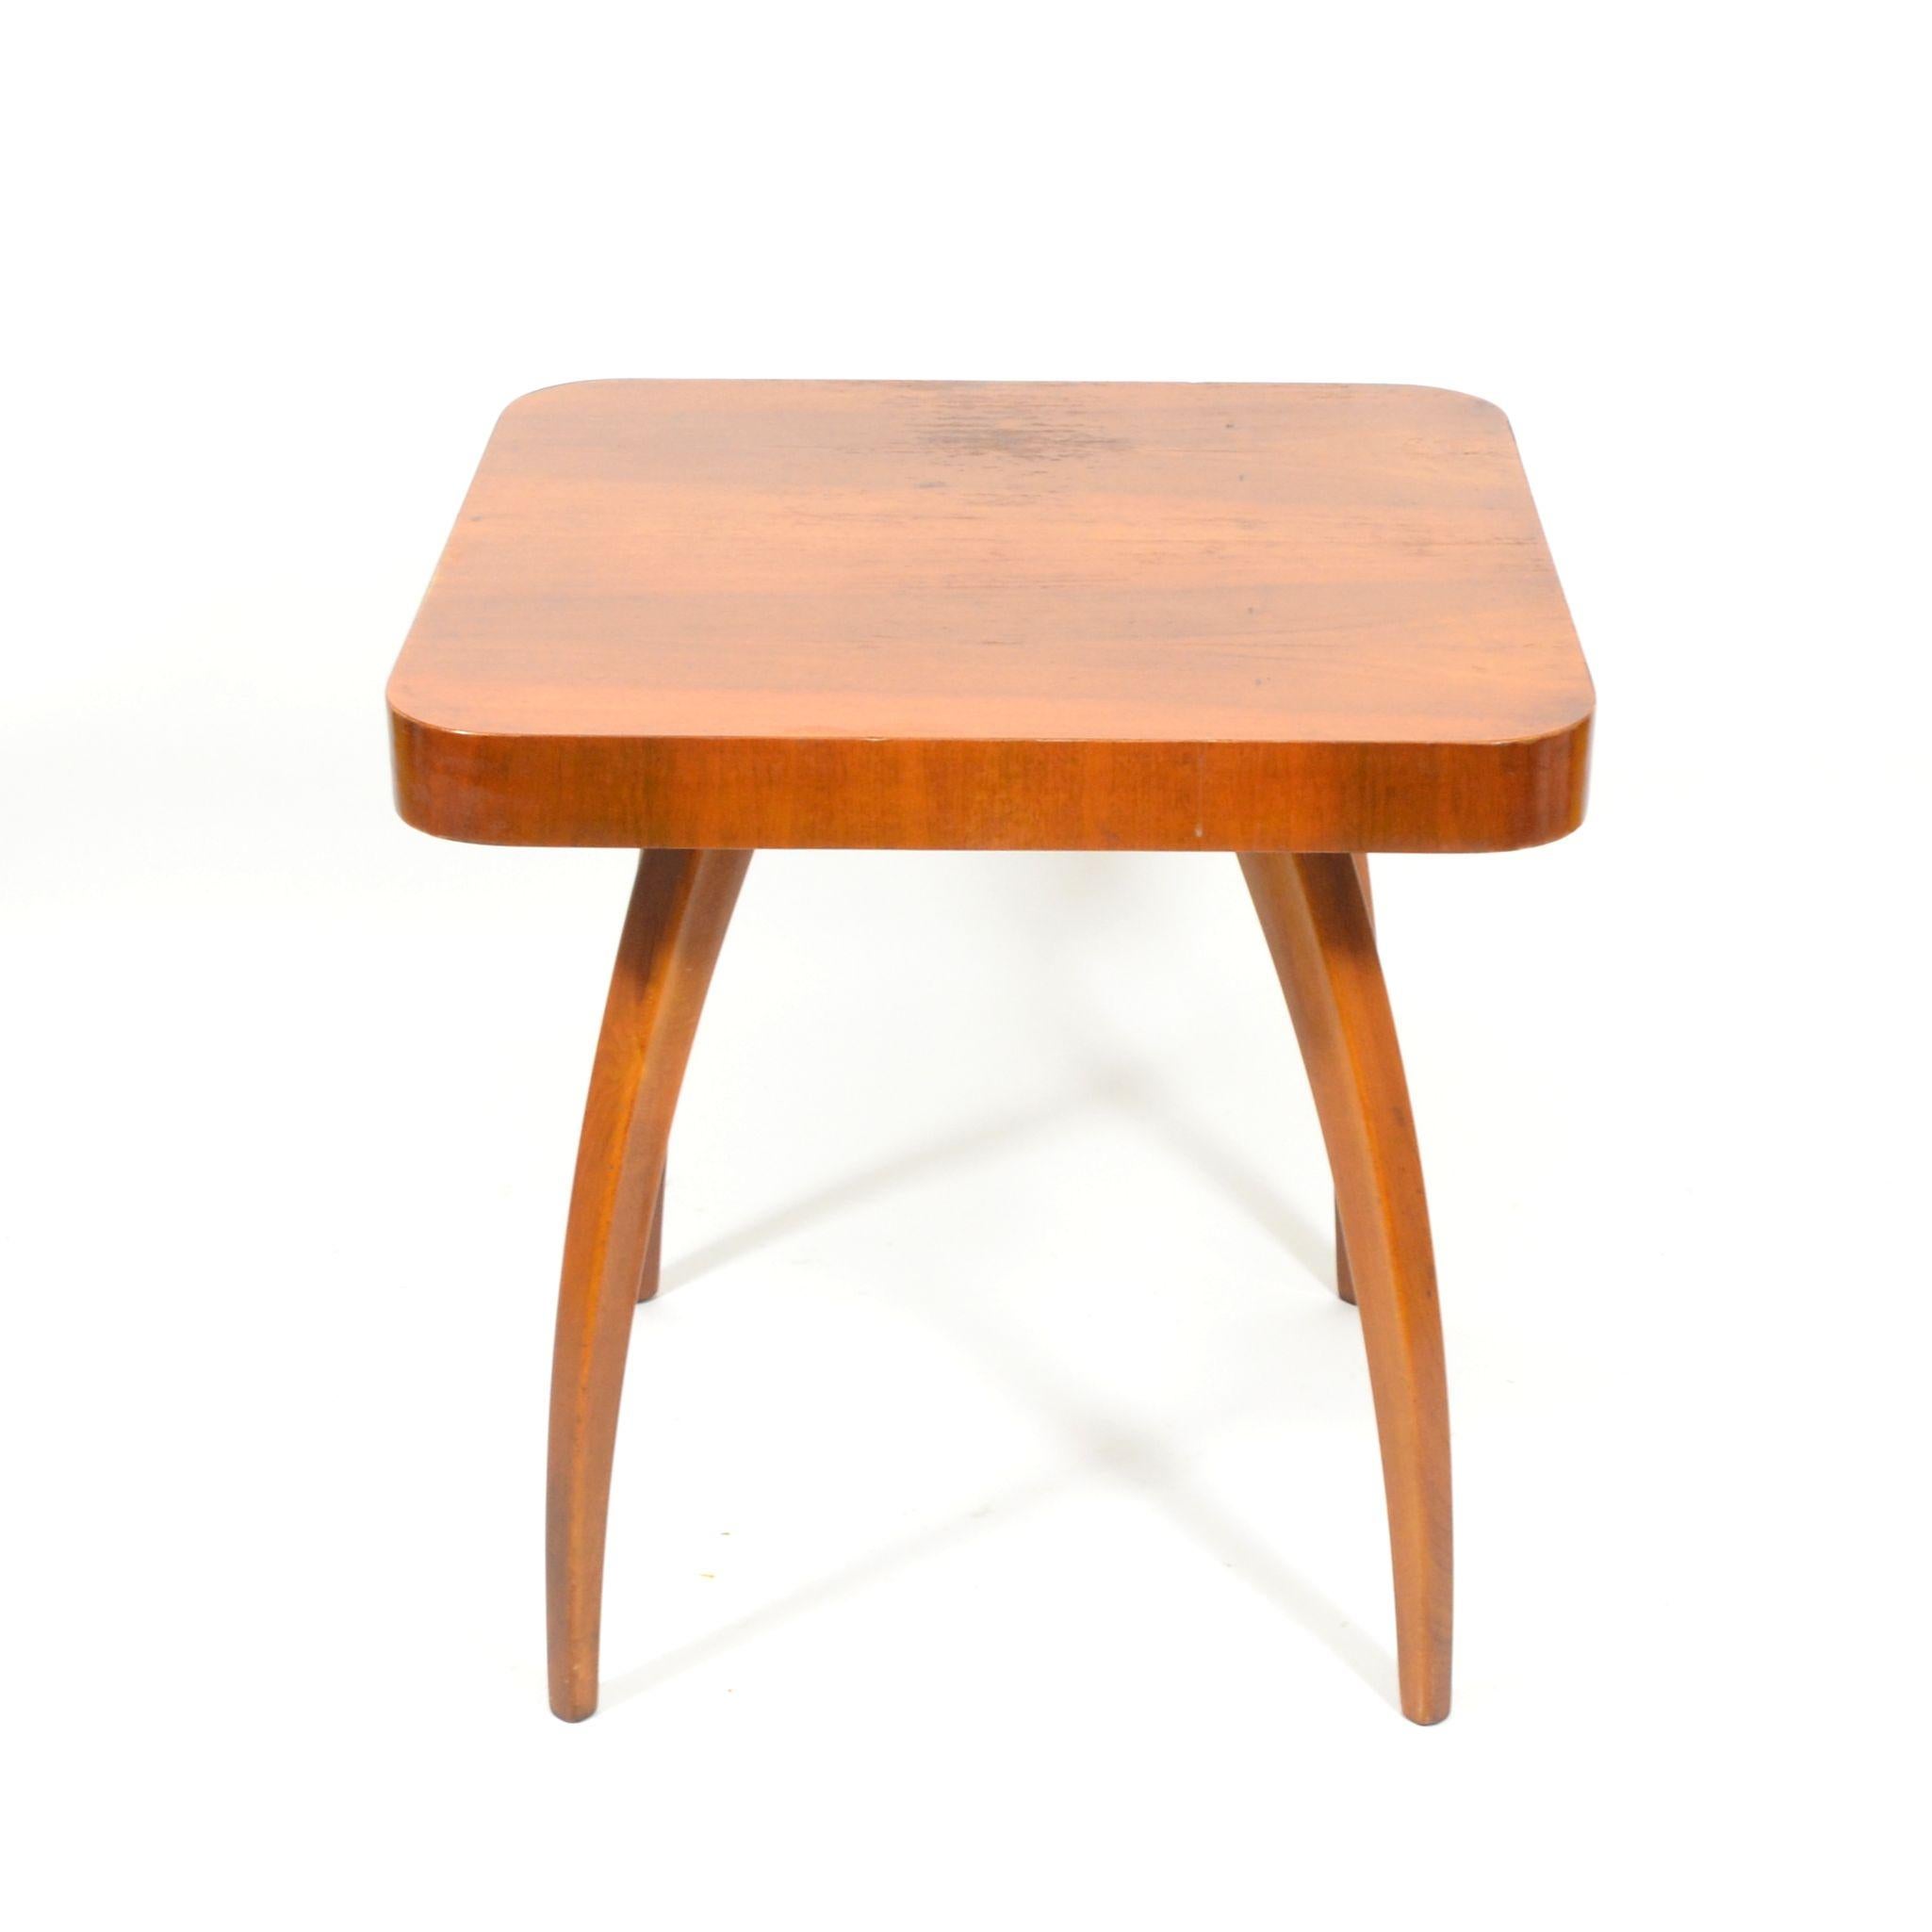 Art Deco midcentury coffee table “The spider” model H-259 designed by Jindrich Halabala manufactured by Czech company UP Zavody, Brno in 1930s. This piece is in original condition with walnut veneer and legs made from beech bentwood. Piece is in